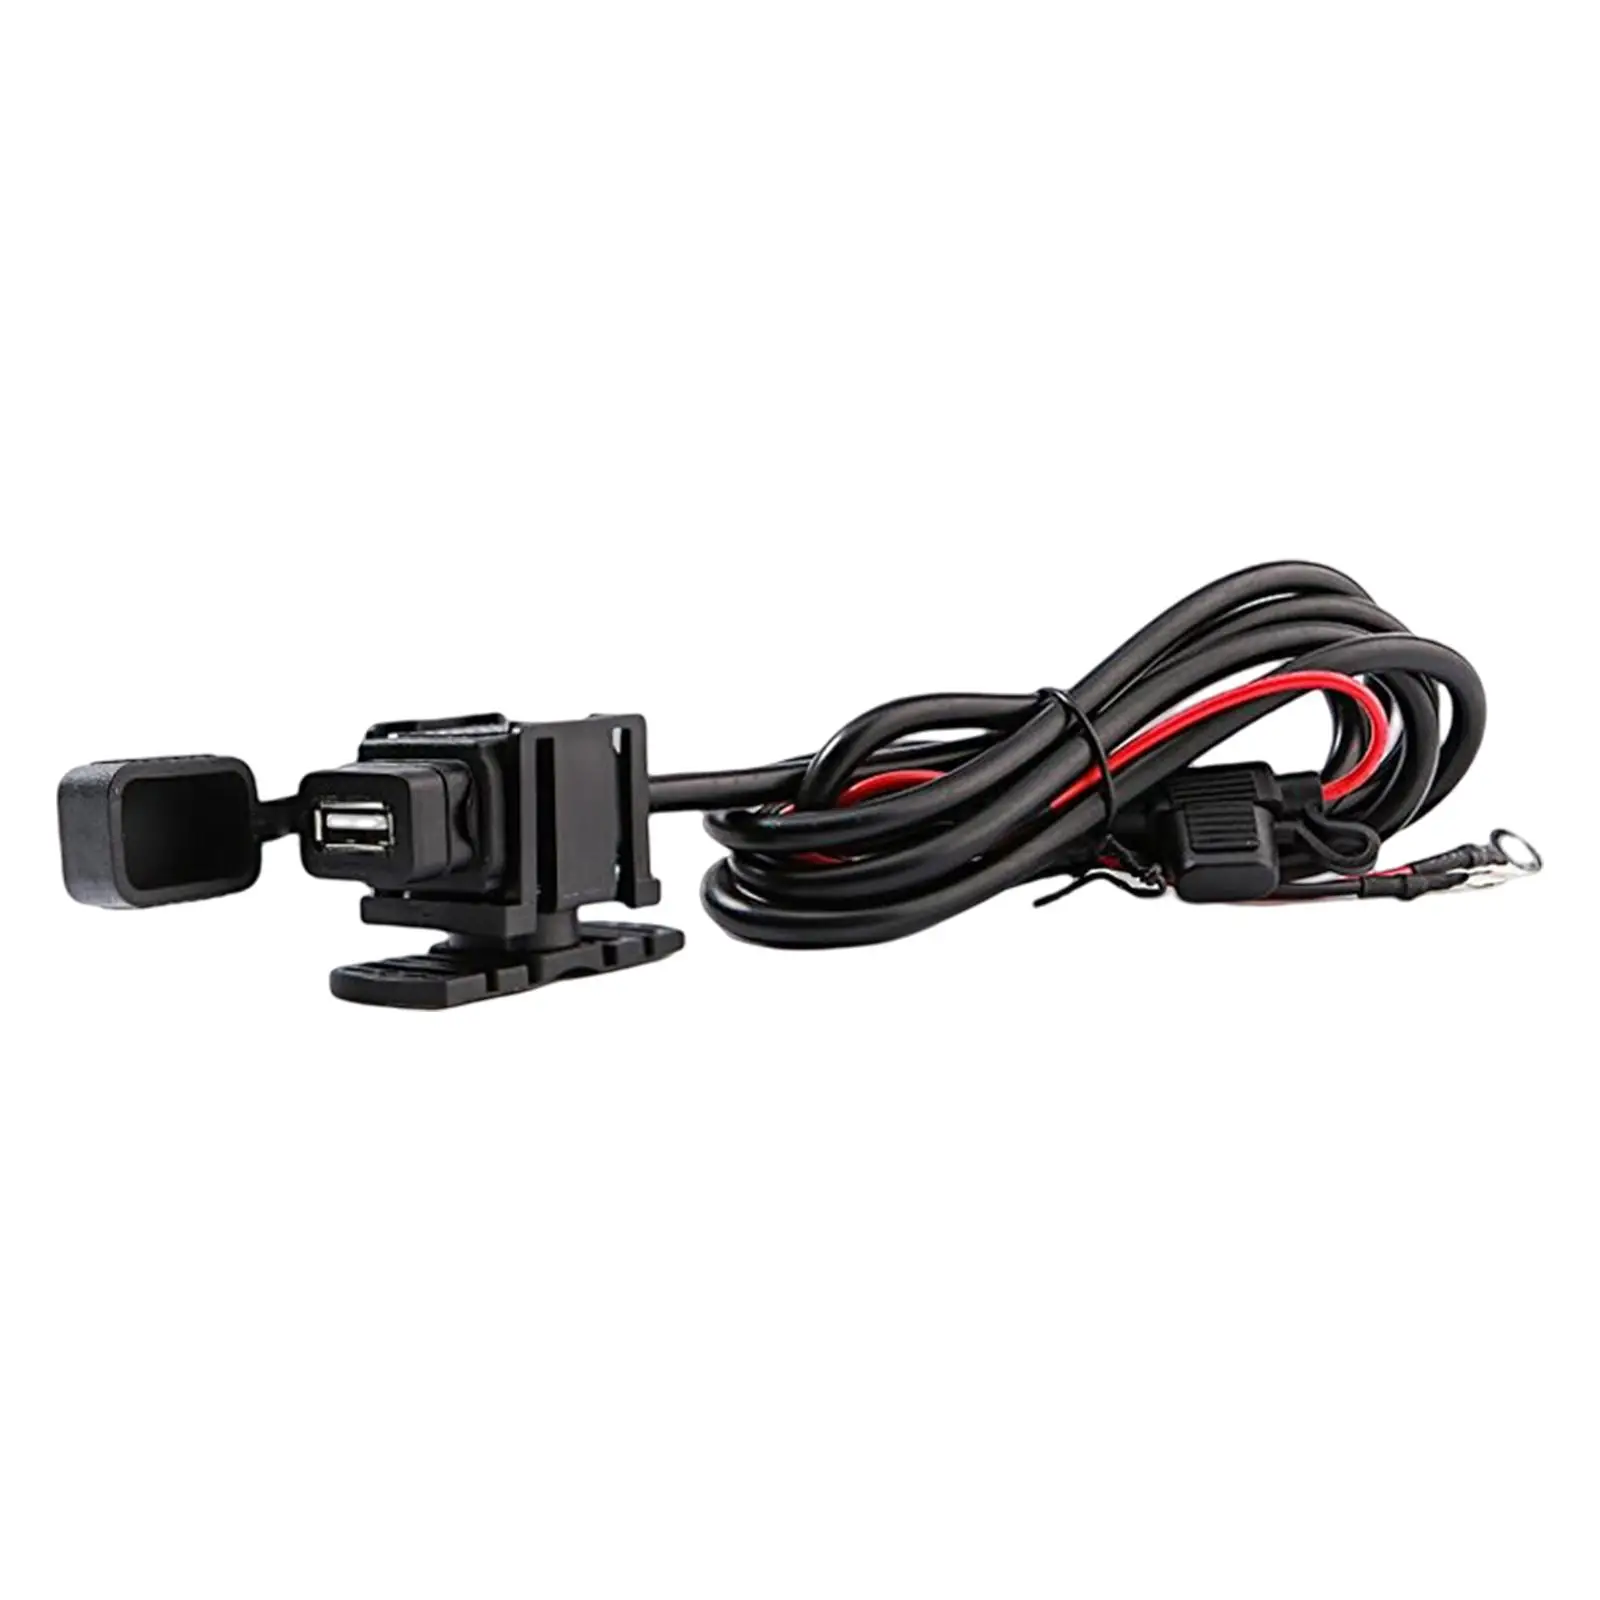 Motorcycle USB Charger Charging Cable Waterproof USB Port 5V 2.1A 12V-24V Socket Cable for Phone Tablet Motorcycle Accessories